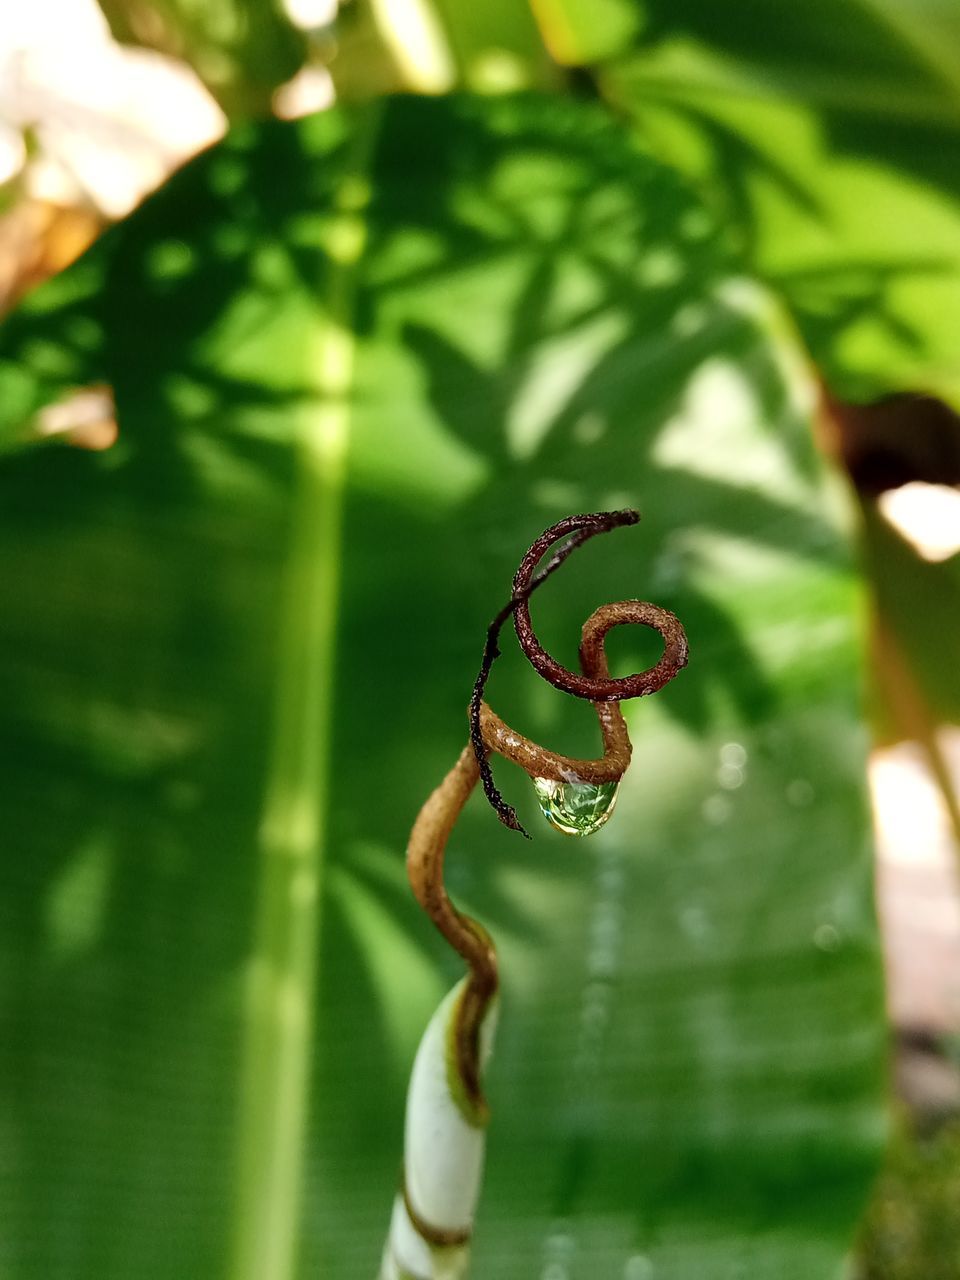 green, leaf, plant part, plant, animal, animal themes, nature, animal wildlife, flower, close-up, wildlife, one animal, no people, macro photography, insect, focus on foreground, day, branch, outdoors, beauty in nature, tree, selective focus, growth, jungle, grass, sunlight, reptile